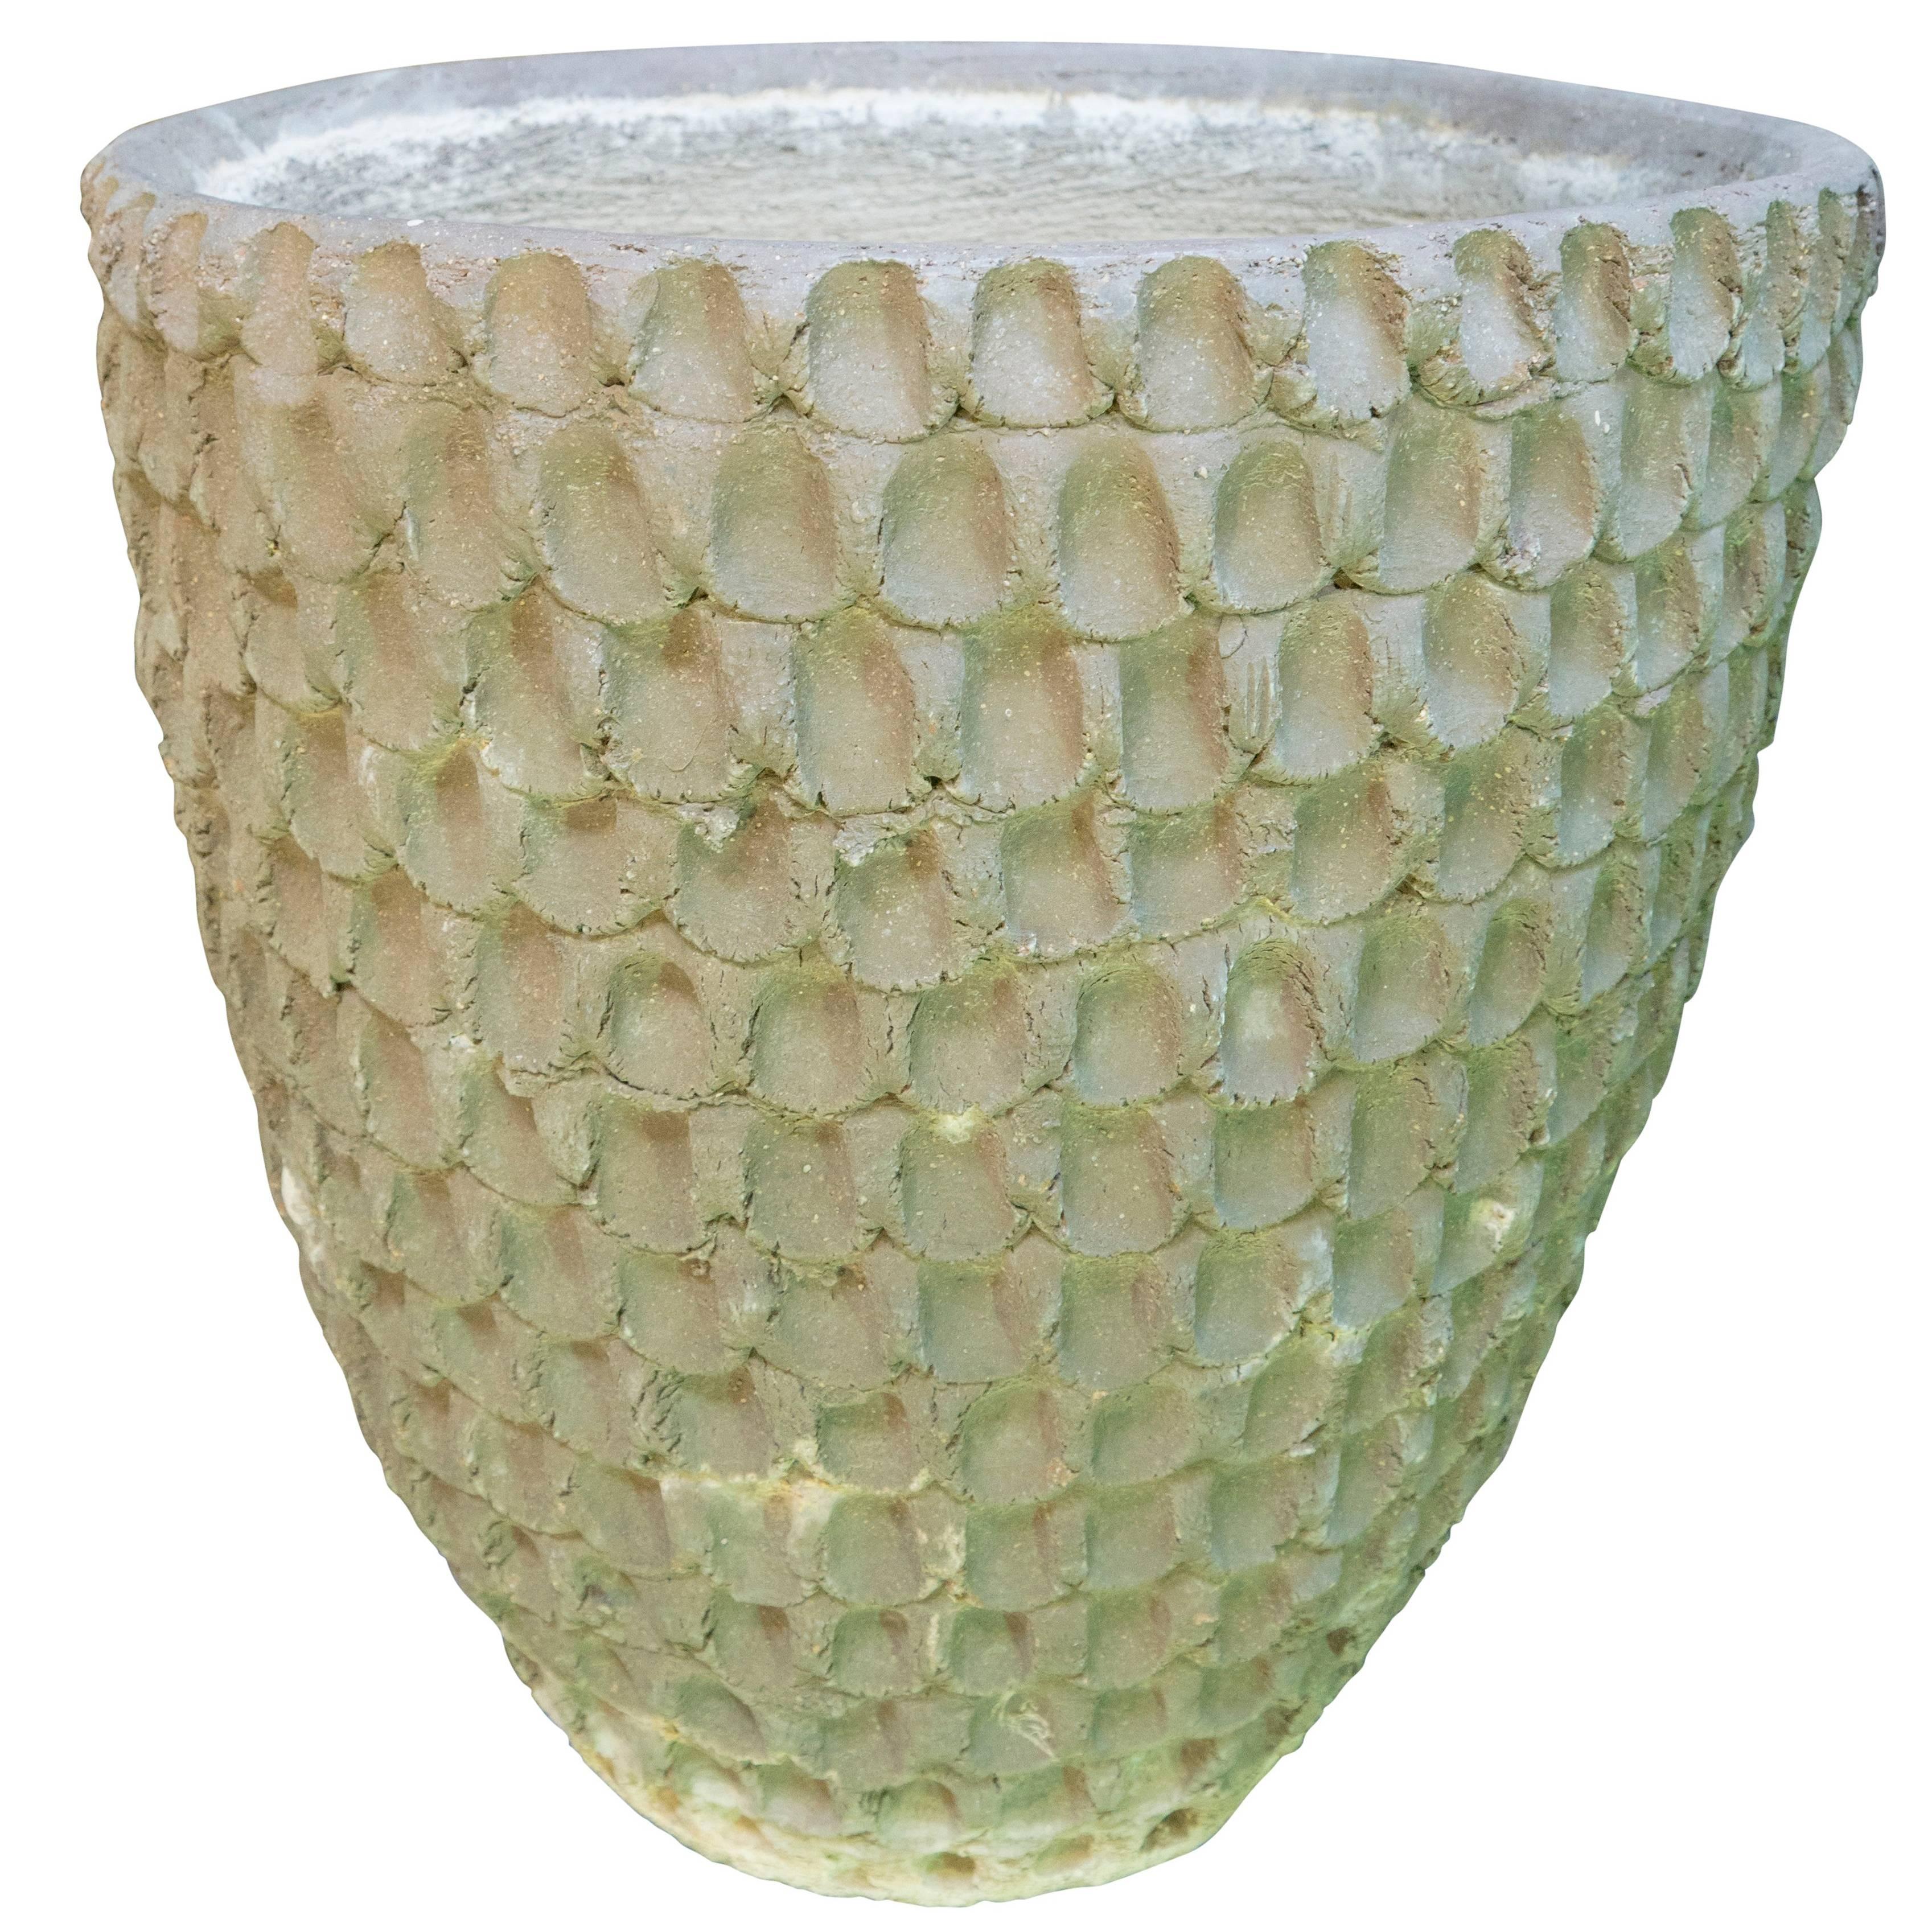 Traditional un-glazed terracotta Stan Bitters designed thumb pot, hand built by Hans Sumpf. Created in California, circa 1970, the thumb pot is an attention grabbing vessel suitable for interiors and exteriors.